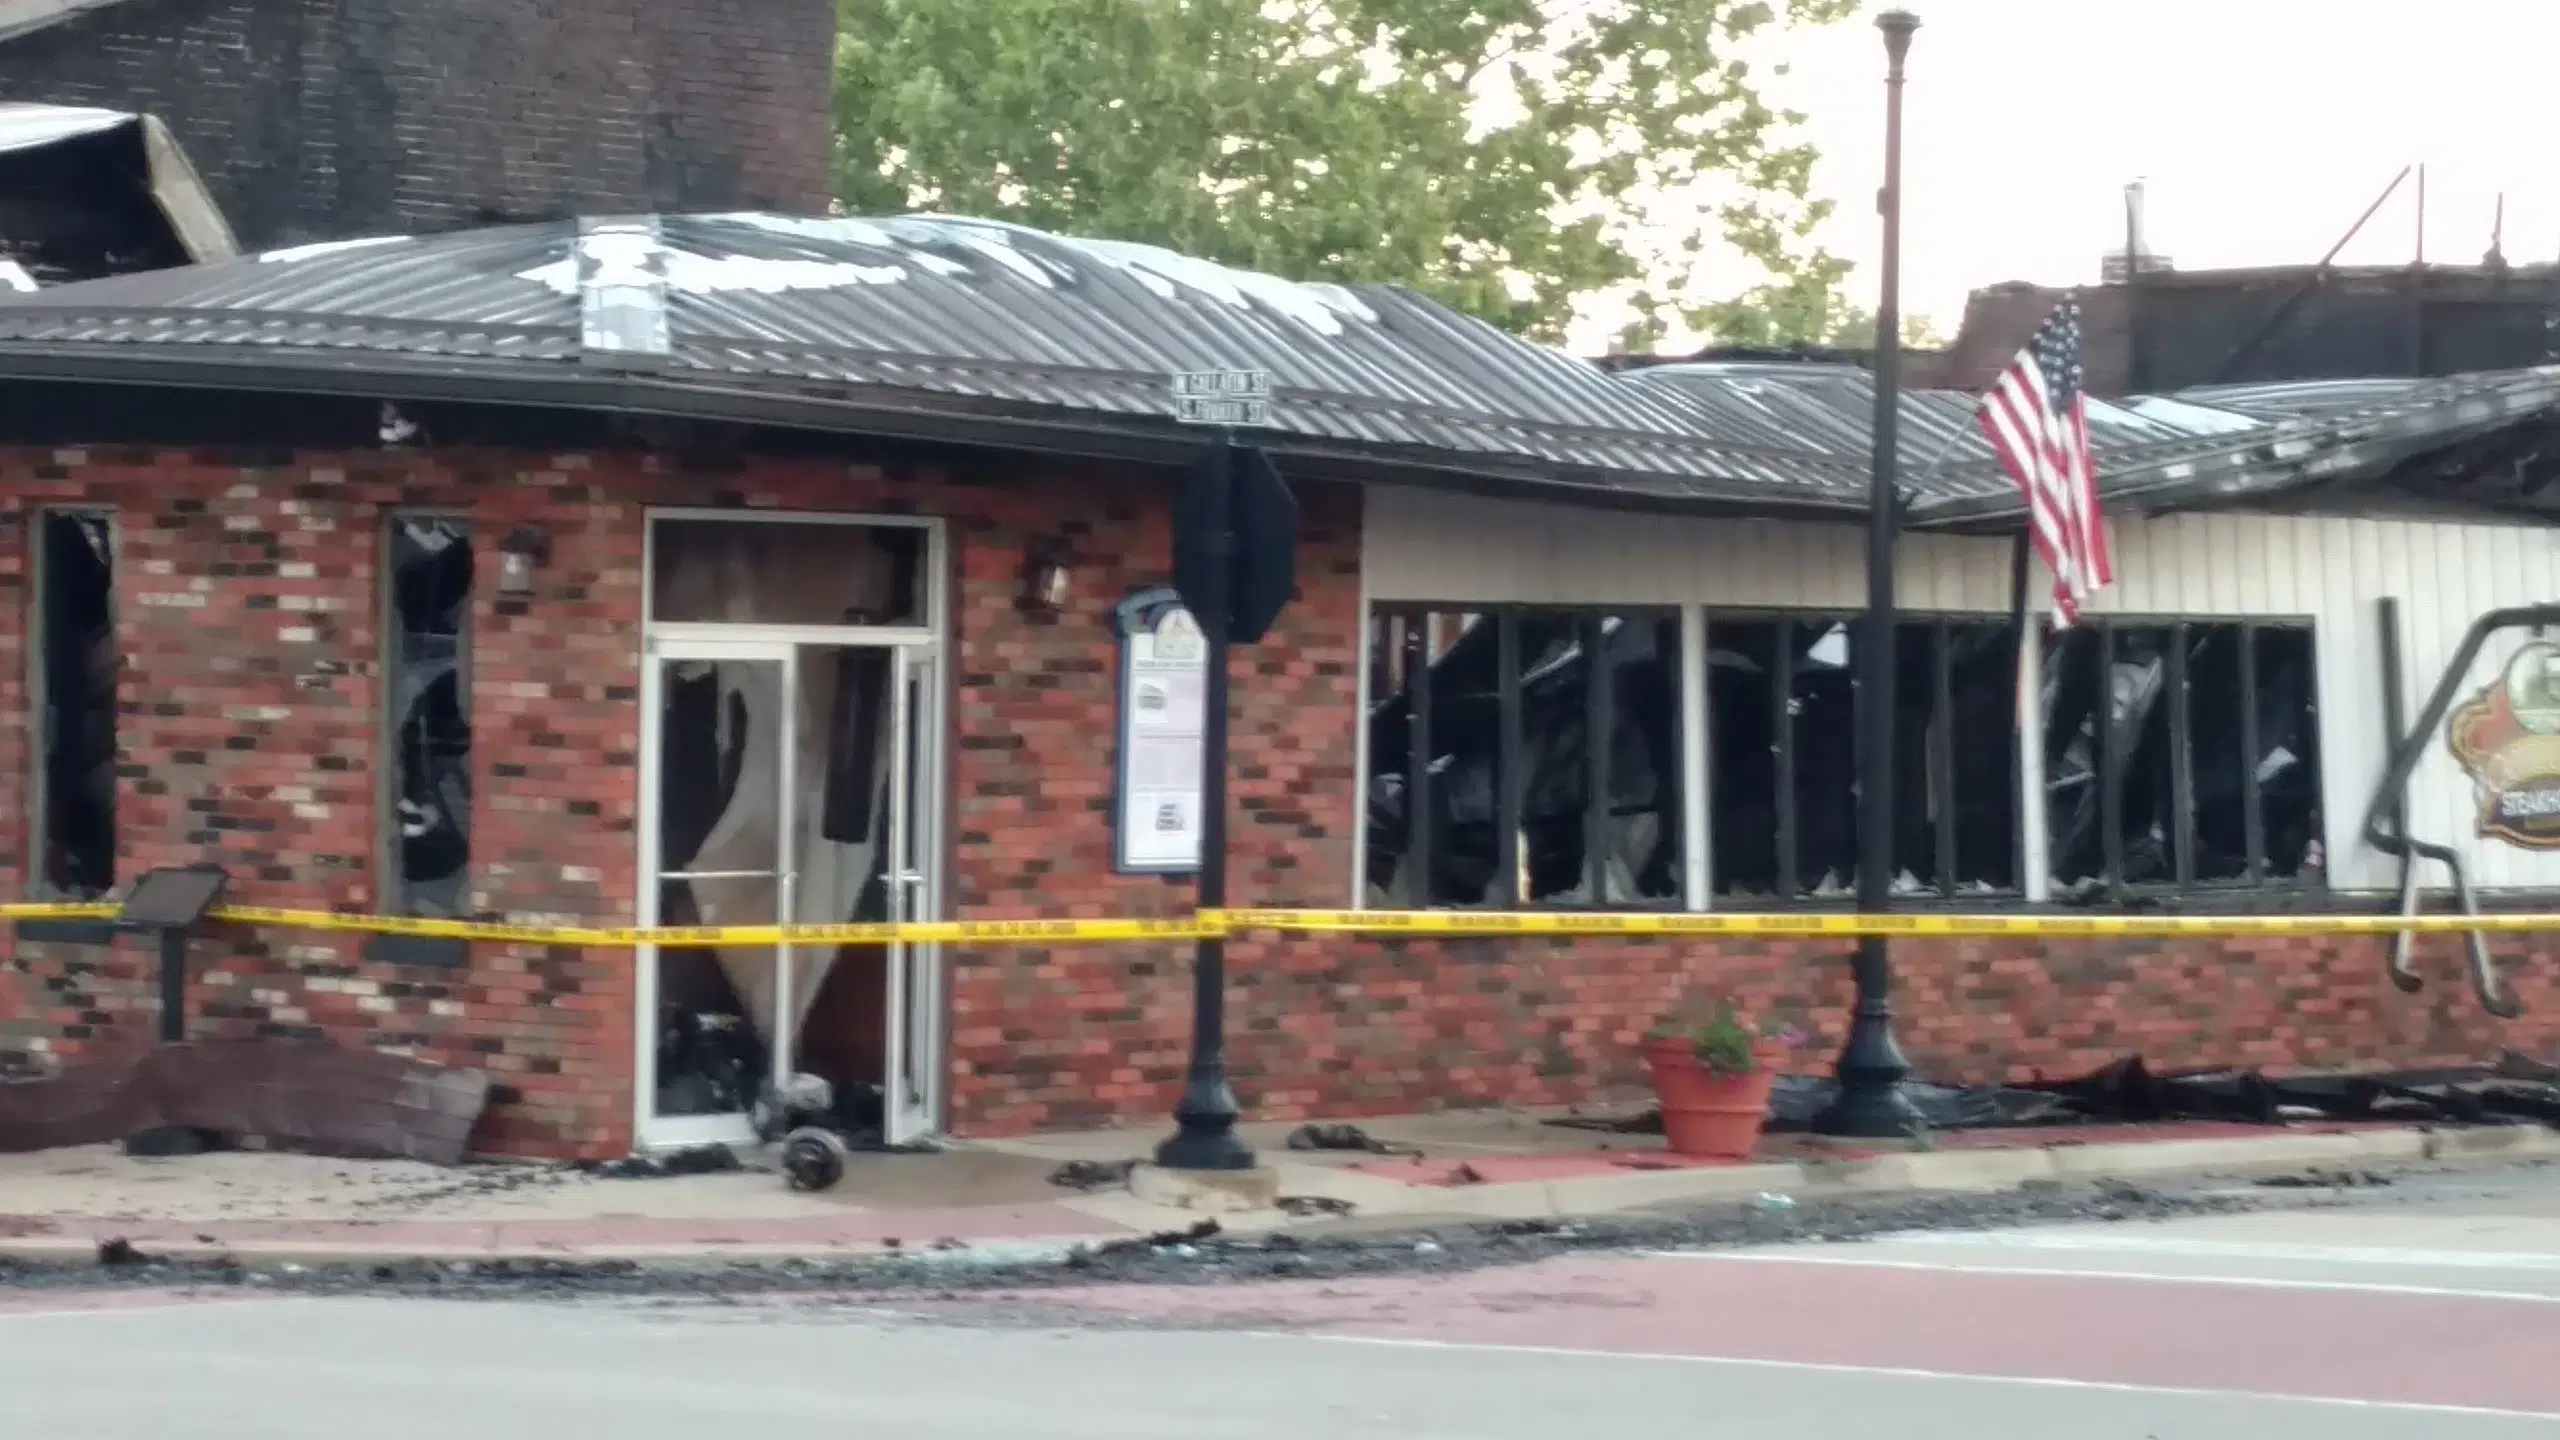 Downtown Vandalia Restaurant a total loss, another business damaged in overnight fire 